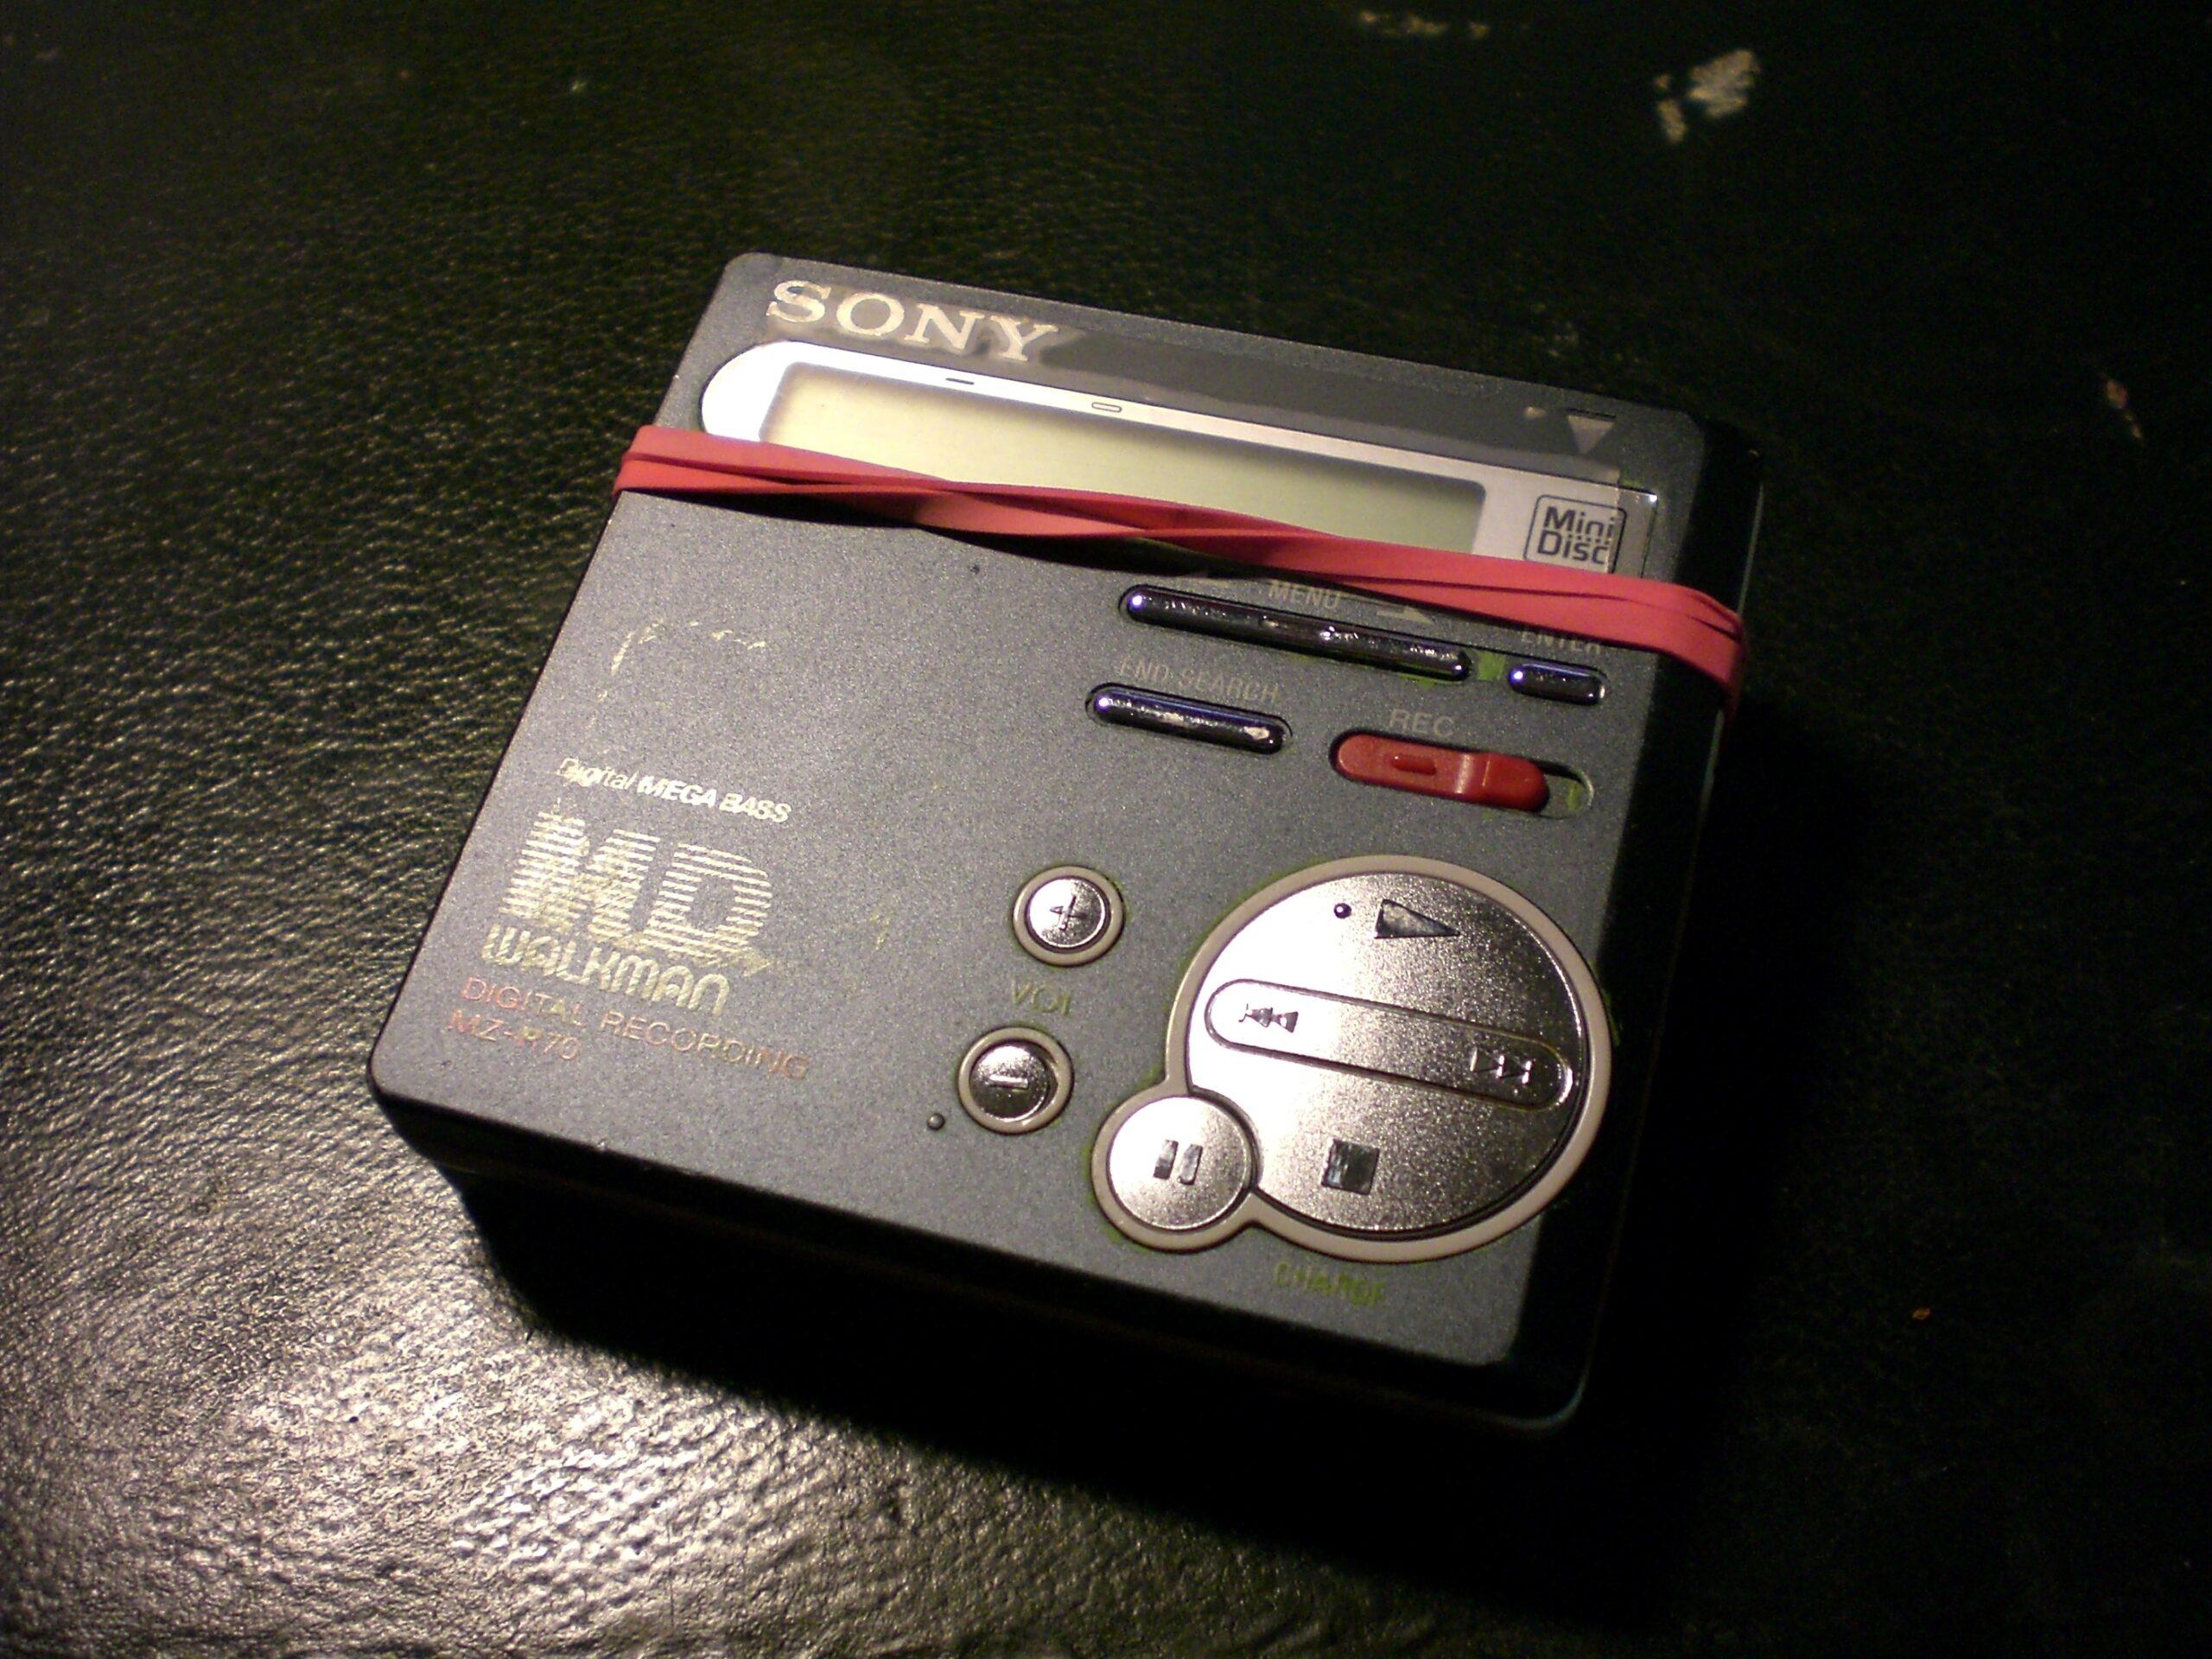 MiniDisc player placed on a black surface.